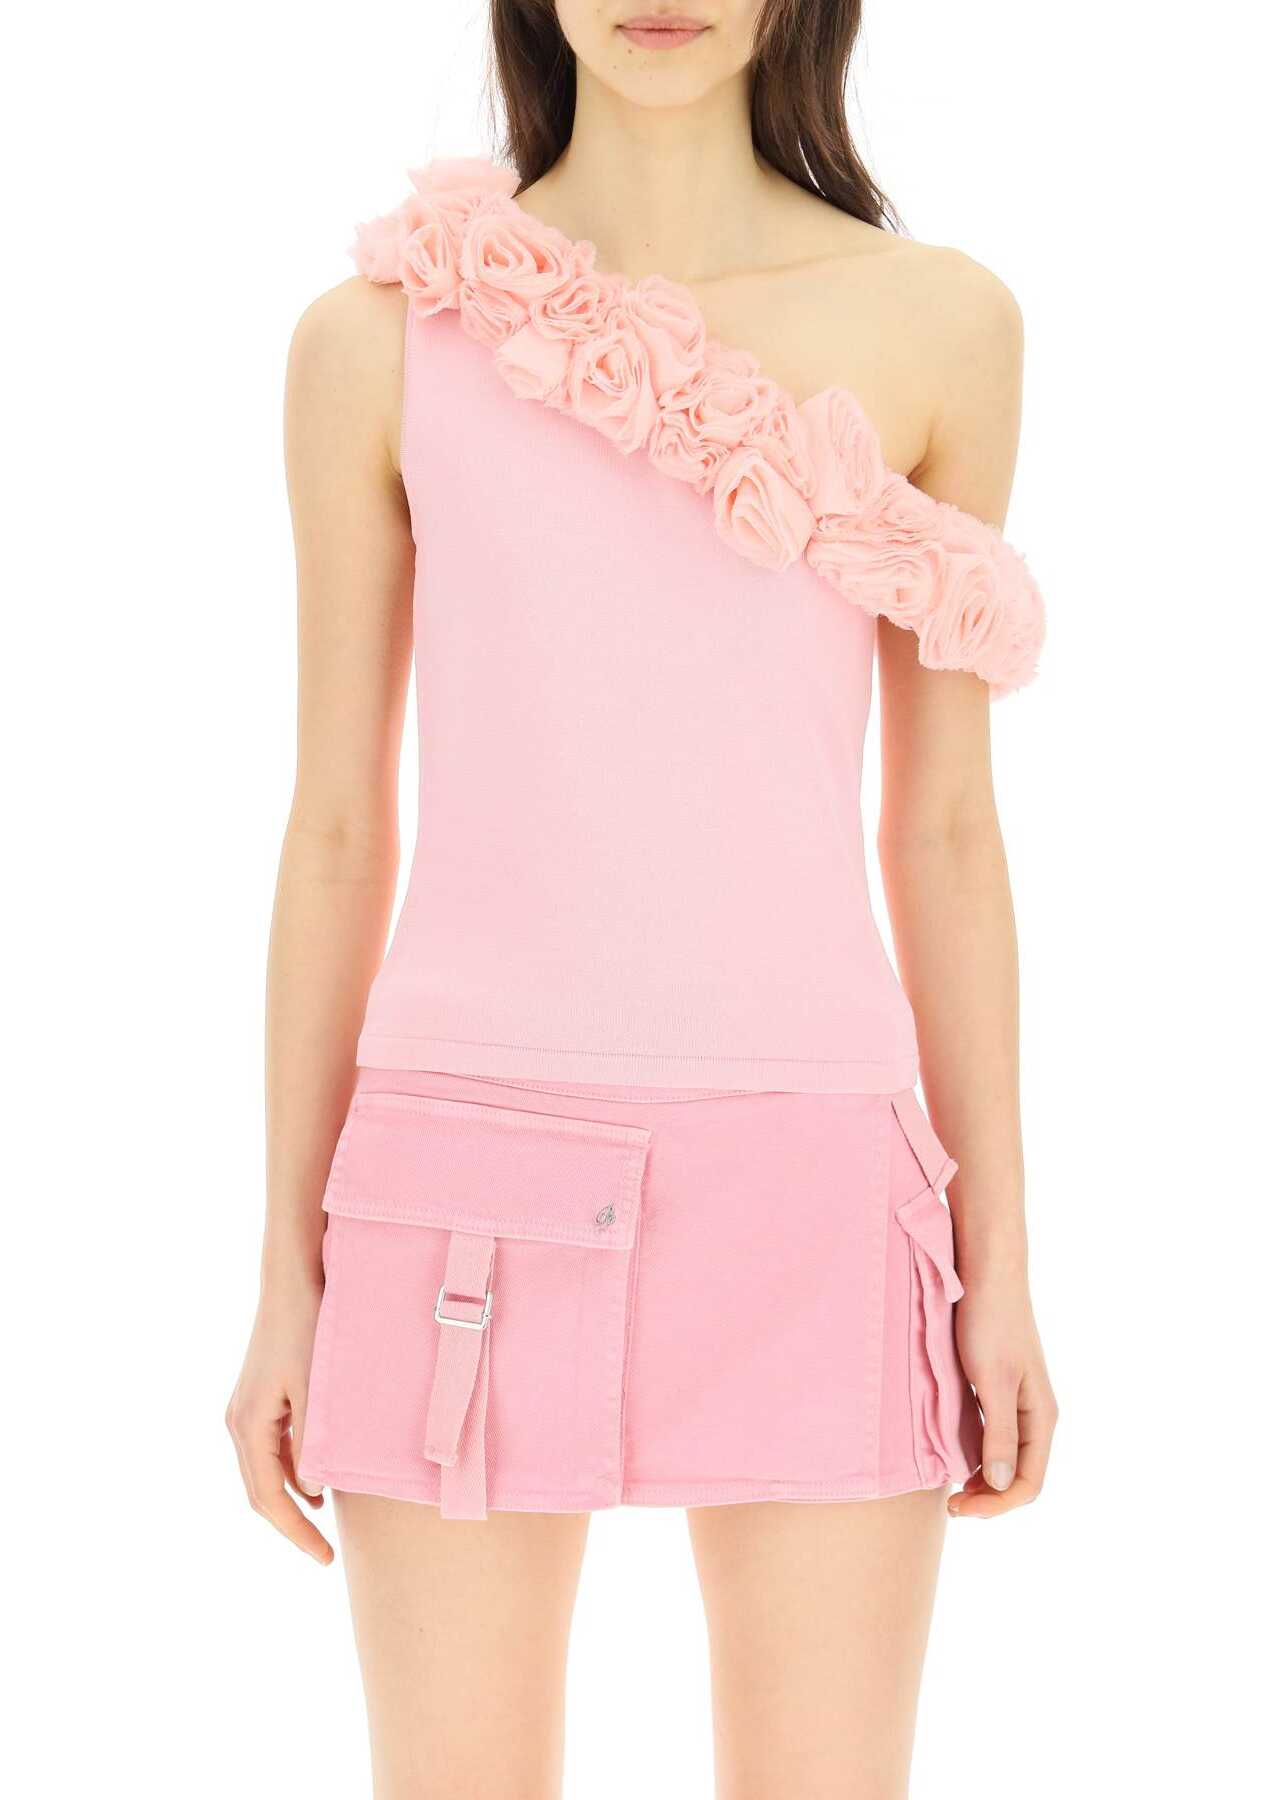 Blumarine One-Shoulder Top With Roses PEONIA image2